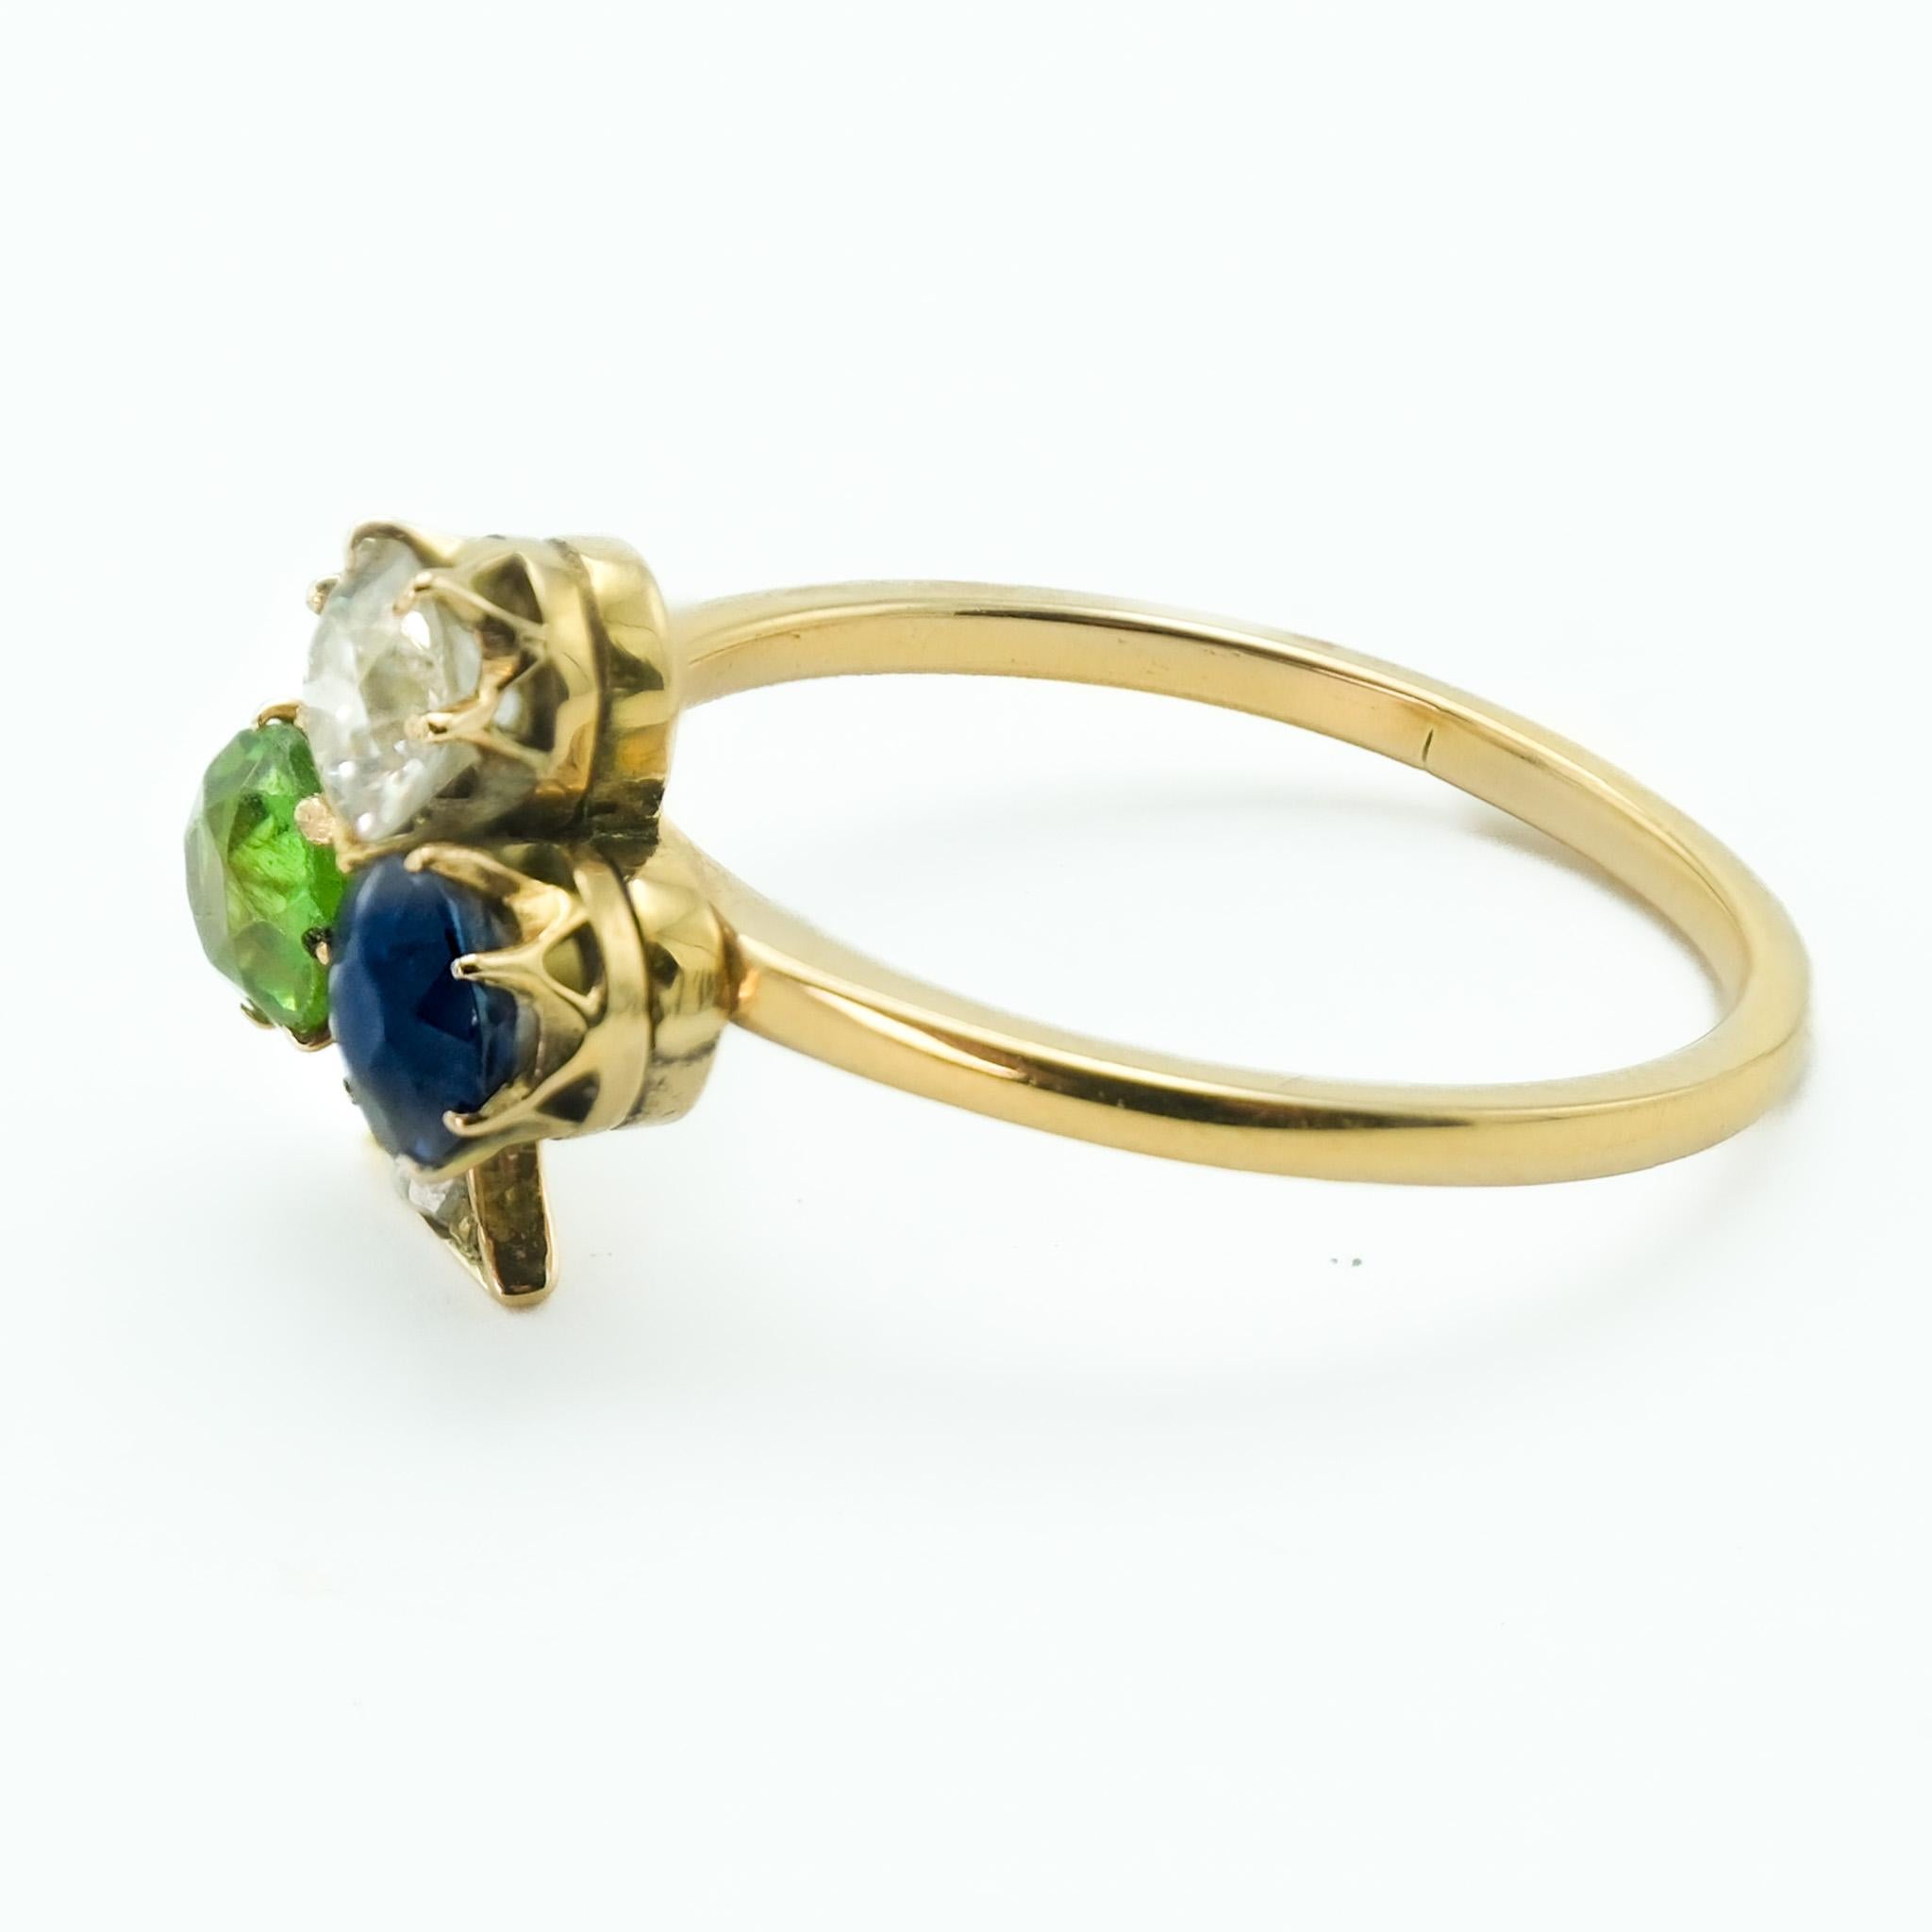 As a representation of elegance and serendipity, this 18 karat yellow gold ring showcases a clover emblem - a symbol historically associated with good fortune and prosperity. 

At the heart of this design are three distinguished gemstones -